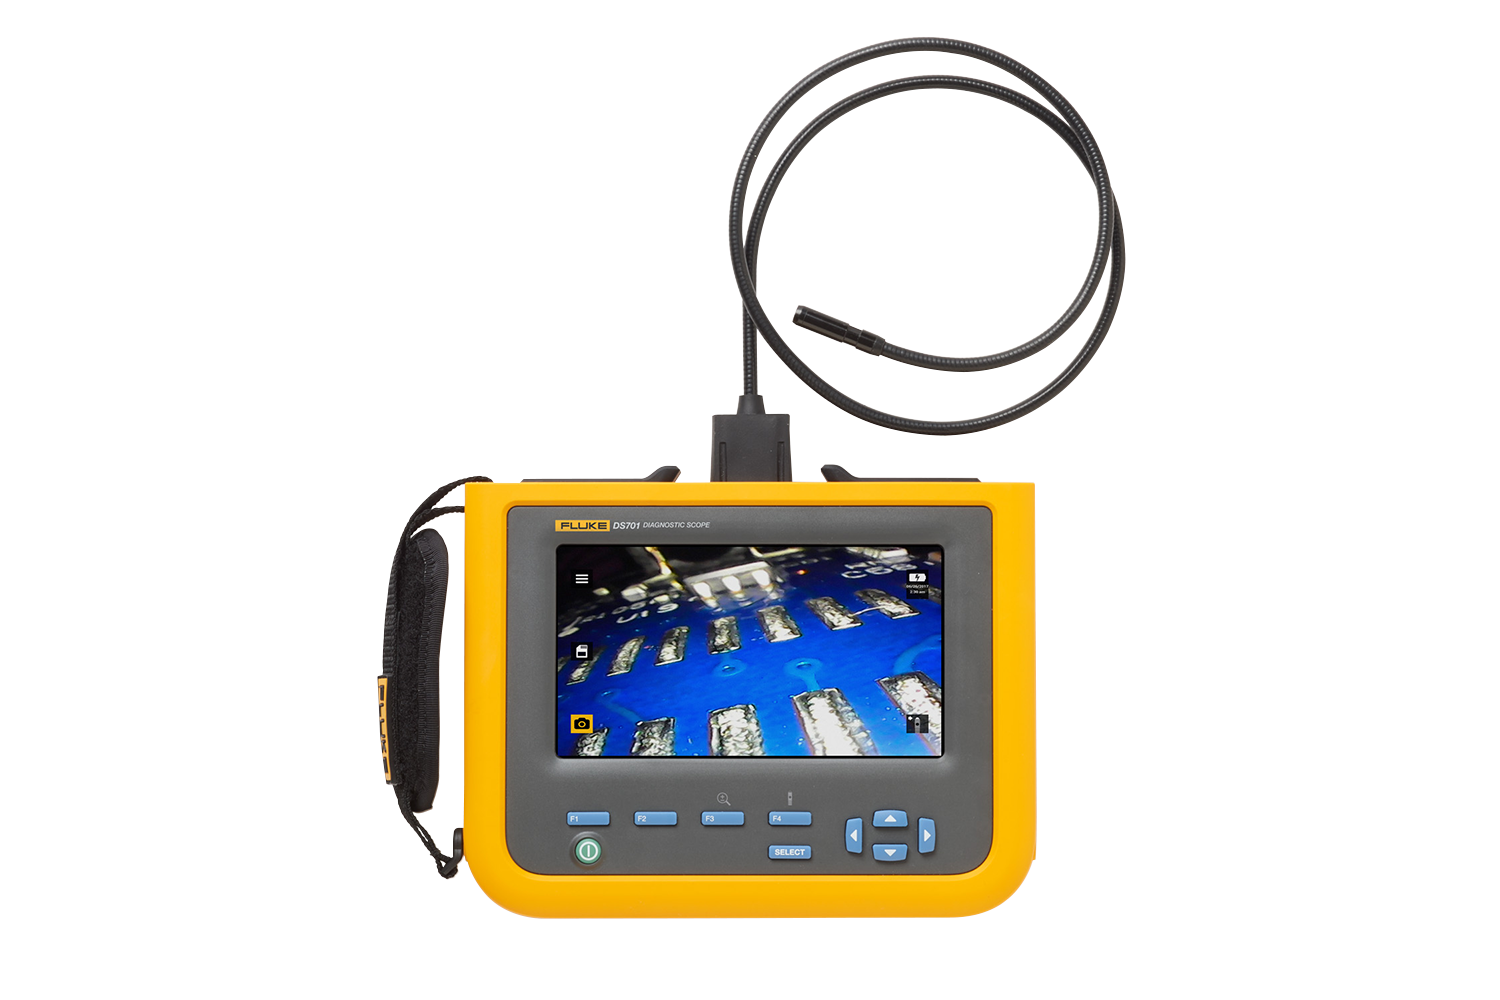 DS703 FC Diagnostic Scope, Compact tool for versatile industrial inspection and troubleshooting